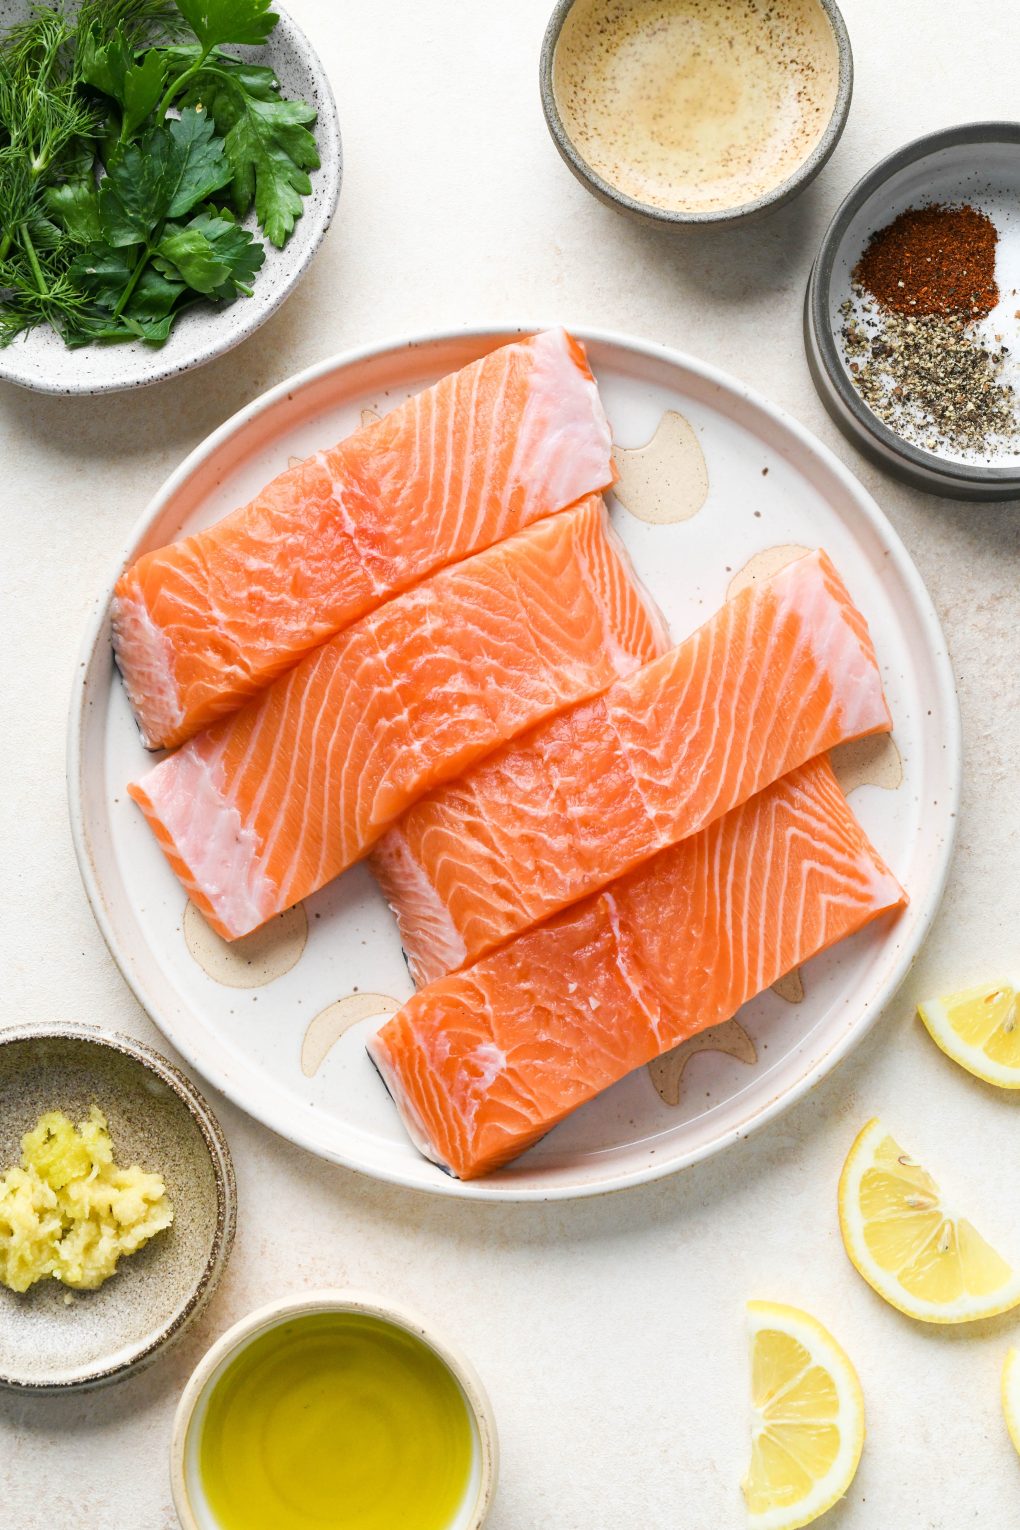 Ingredients for baked salmon on various sized ceramic plates and bowls, on a light cream colored background.